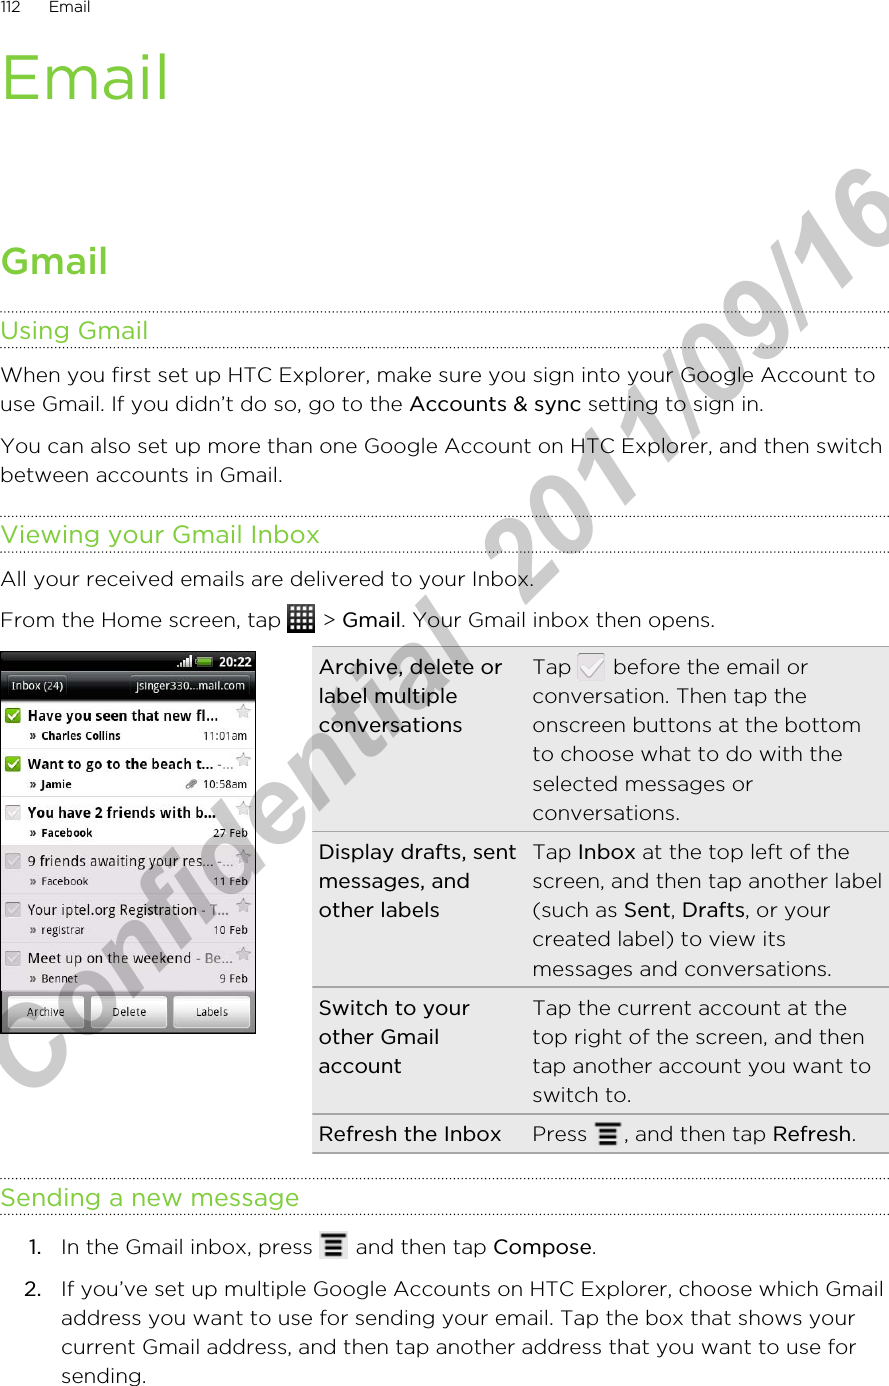 EmailGmailUsing GmailWhen you first set up HTC Explorer, make sure you sign into your Google Account touse Gmail. If you didn’t do so, go to the Accounts &amp; sync setting to sign in.You can also set up more than one Google Account on HTC Explorer, and then switchbetween accounts in Gmail.Viewing your Gmail InboxAll your received emails are delivered to your Inbox.From the Home screen, tap   &gt; Gmail. Your Gmail inbox then opens.Archive, delete orlabel multipleconversationsTap   before the email orconversation. Then tap theonscreen buttons at the bottomto choose what to do with theselected messages orconversations.Display drafts, sentmessages, andother labelsTap Inbox at the top left of thescreen, and then tap another label(such as Sent, Drafts, or yourcreated label) to view itsmessages and conversations.Switch to yourother GmailaccountTap the current account at thetop right of the screen, and thentap another account you want toswitch to.Refresh the Inbox Press  , and then tap Refresh.Sending a new message1. In the Gmail inbox, press   and then tap Compose.2. If you’ve set up multiple Google Accounts on HTC Explorer, choose which Gmailaddress you want to use for sending your email. Tap the box that shows yourcurrent Gmail address, and then tap another address that you want to use forsending.112 EmailHTC Confidential  2011/09/16 